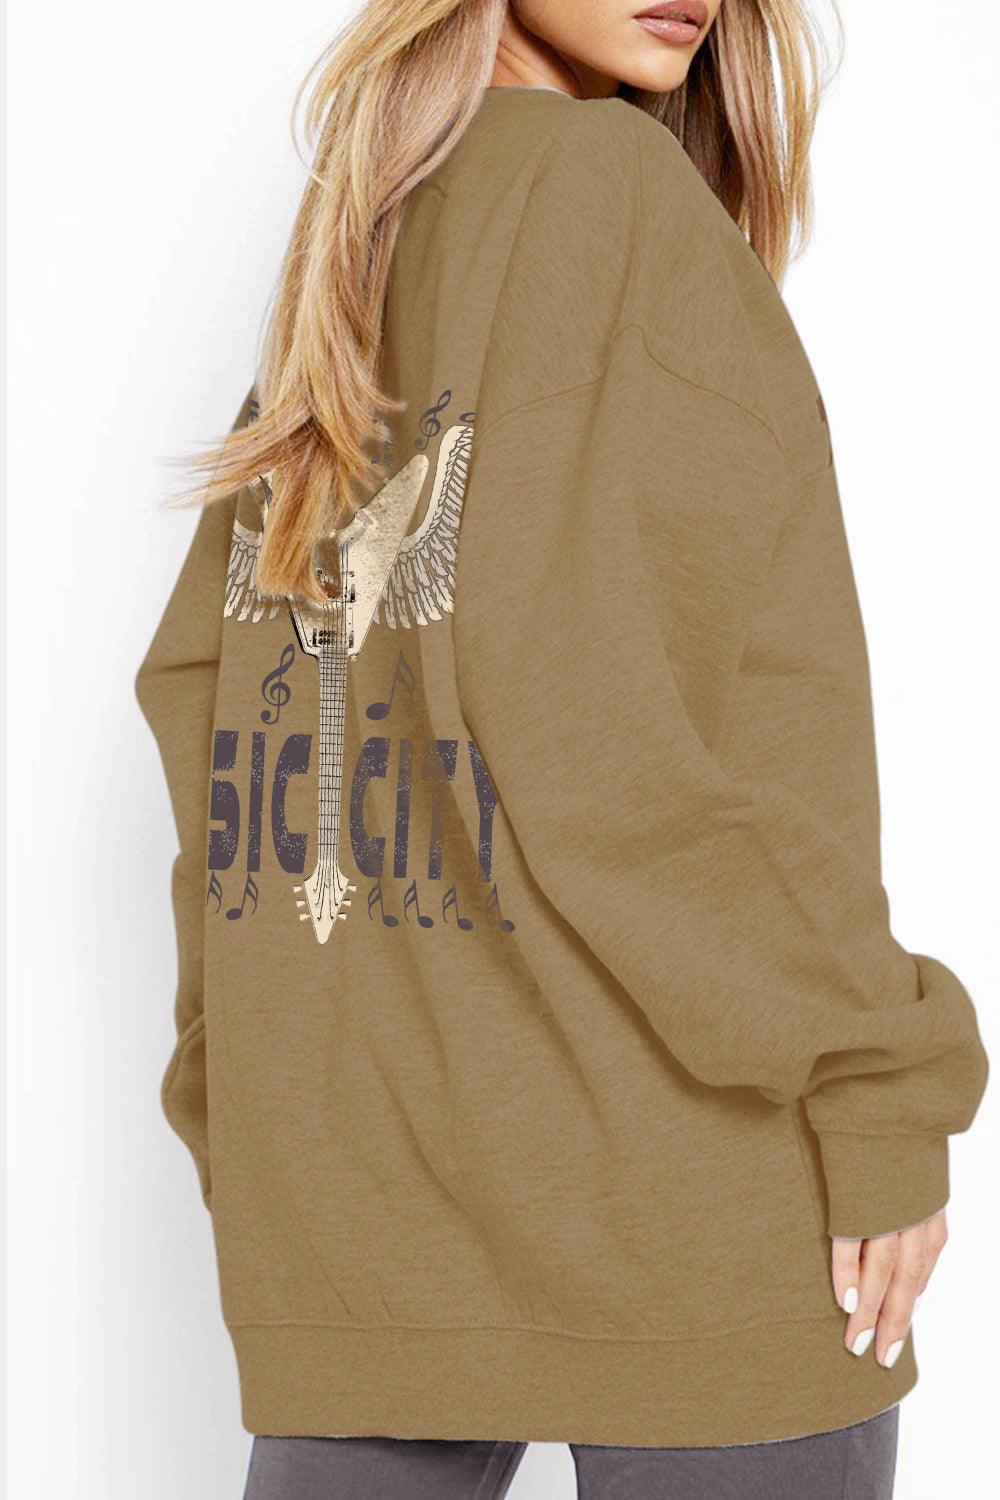 Simply Love Simply Love Full Size Round Neck Dropped Shoulder MUSIC CITY Graphic Sweatshirt - Lucianne Boutique